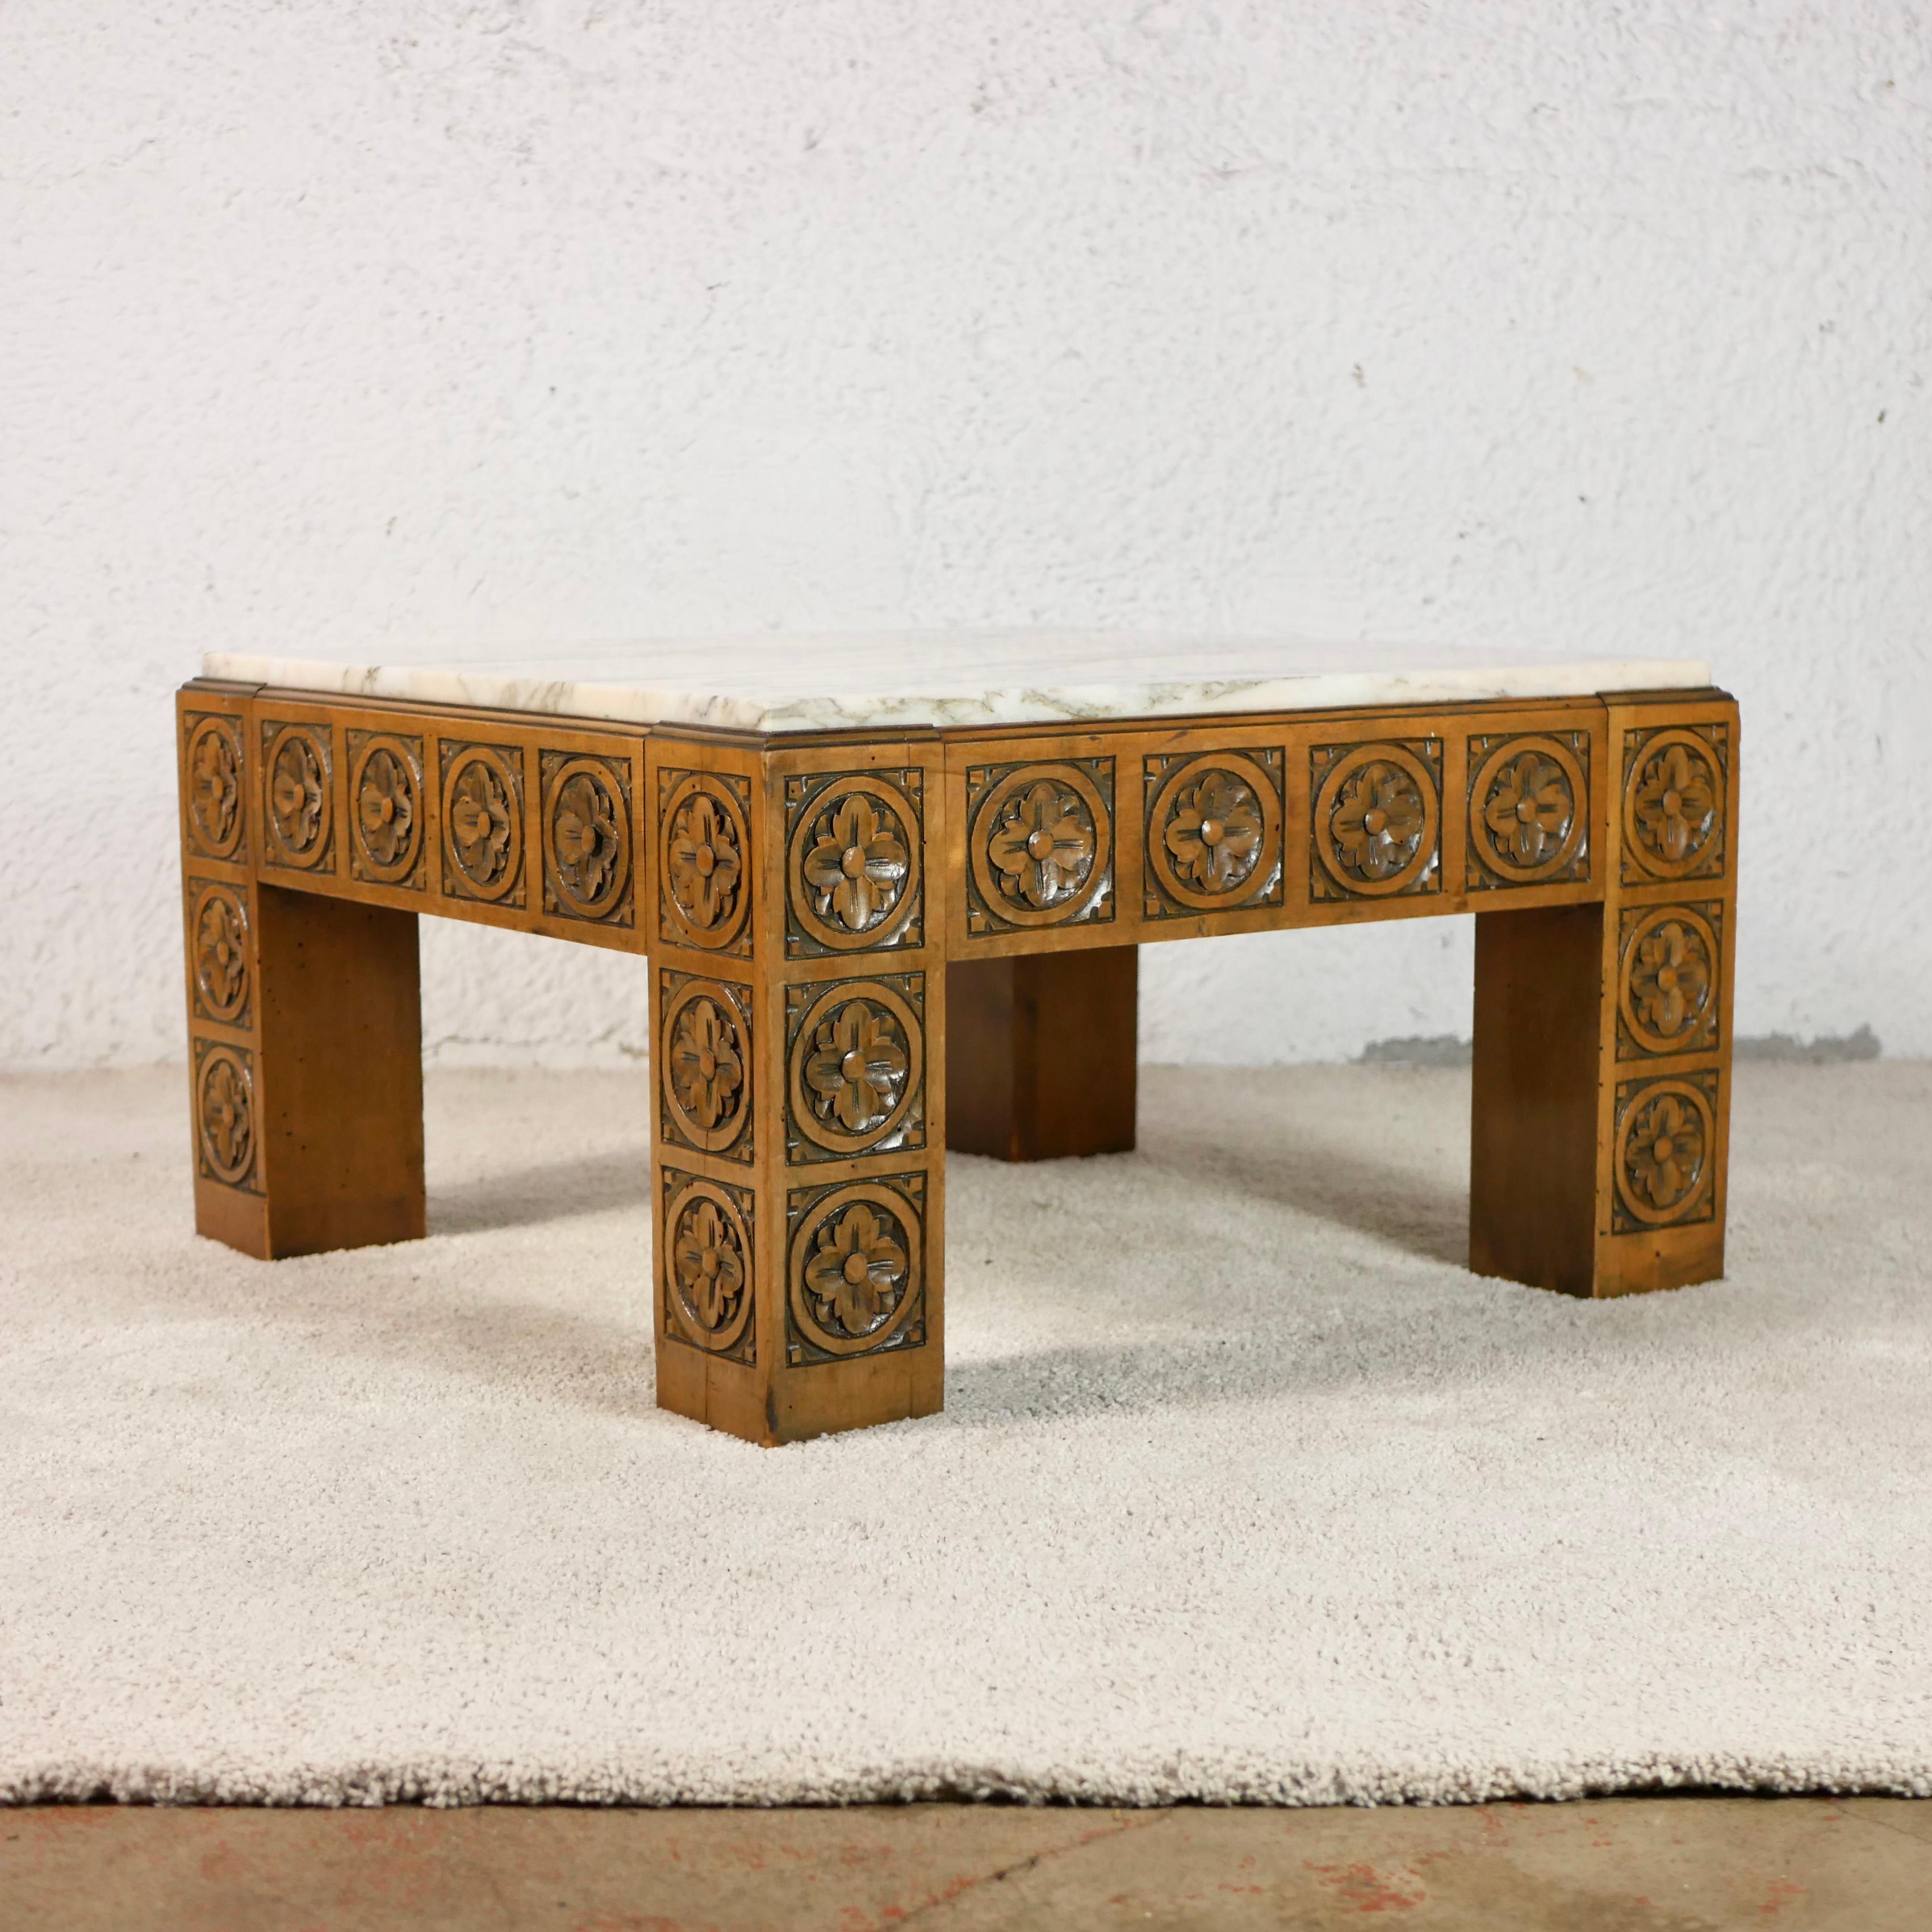 Midcentury Carved Wood and Marble Square Coffee Table from Spain 1